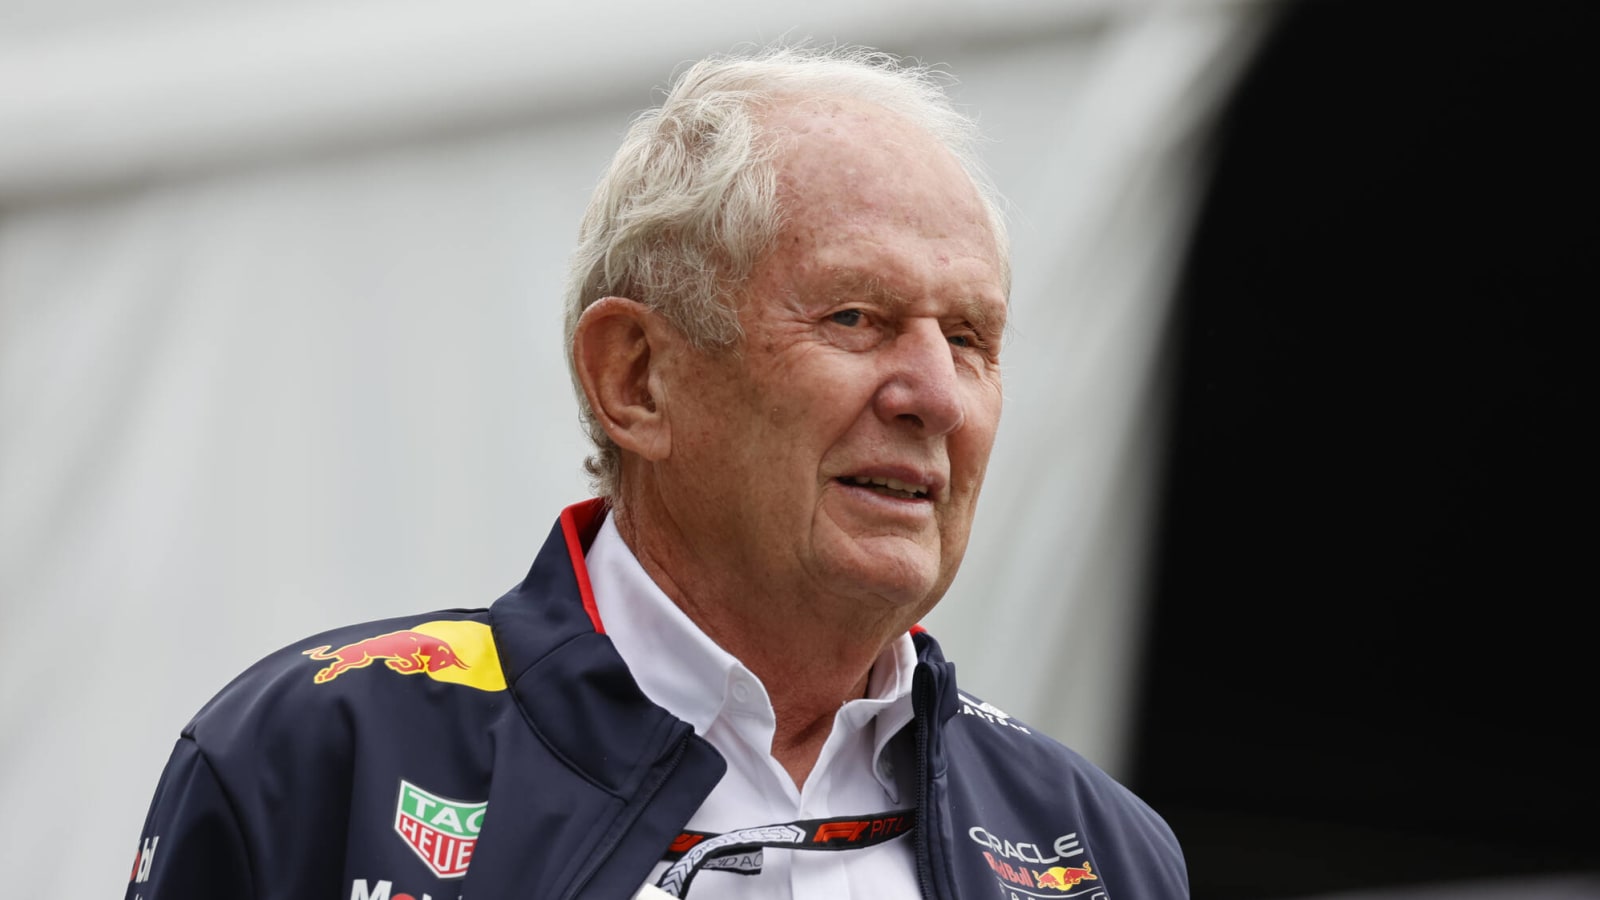 Helmut Marko urges Red Bull to ‘rise to the challenge’ seeing the Lando Norris-led McLaren’s MIGHTY performances